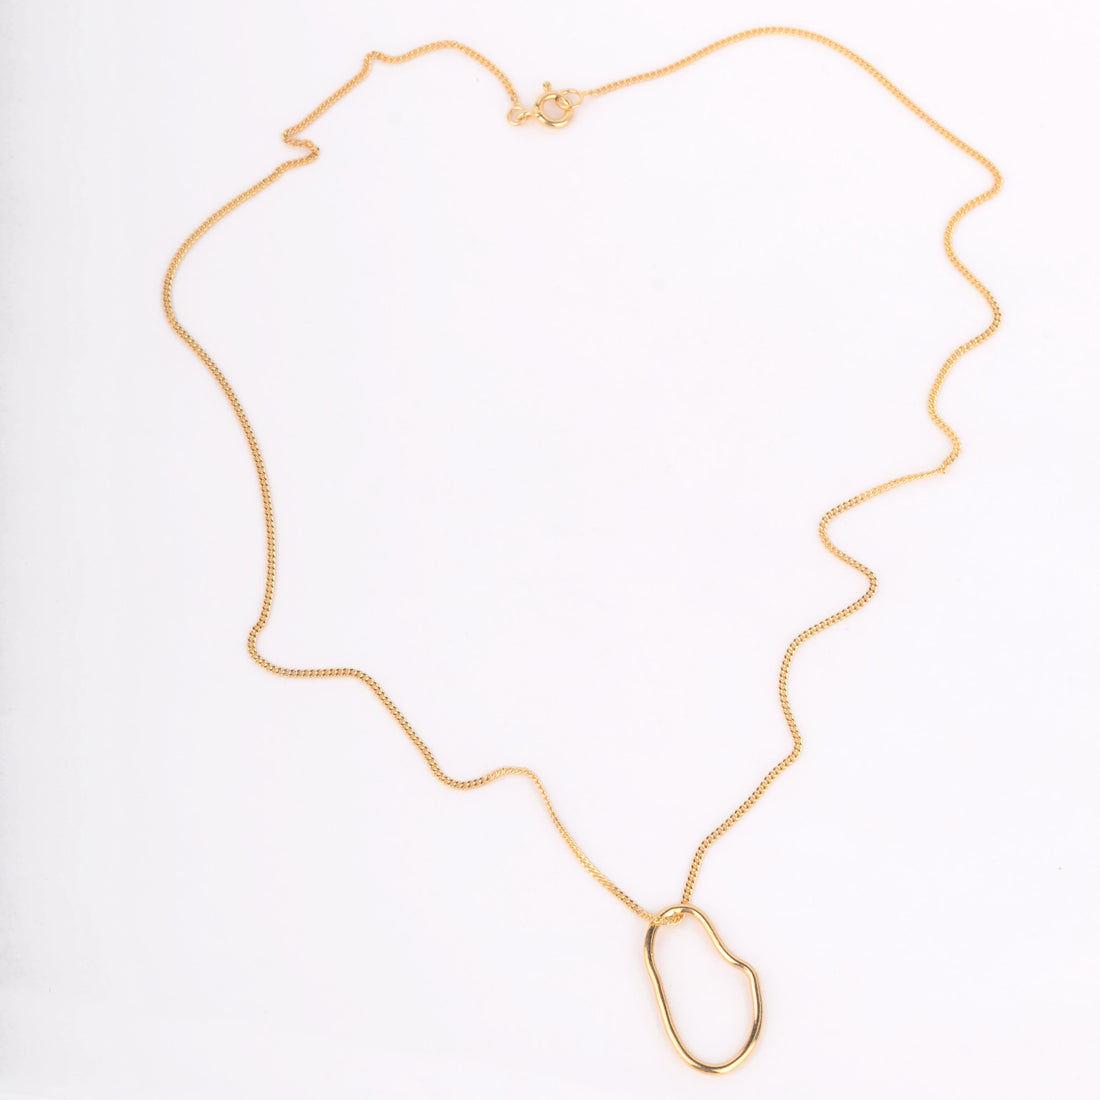 NECKLACE COMO - GOLD PLATED